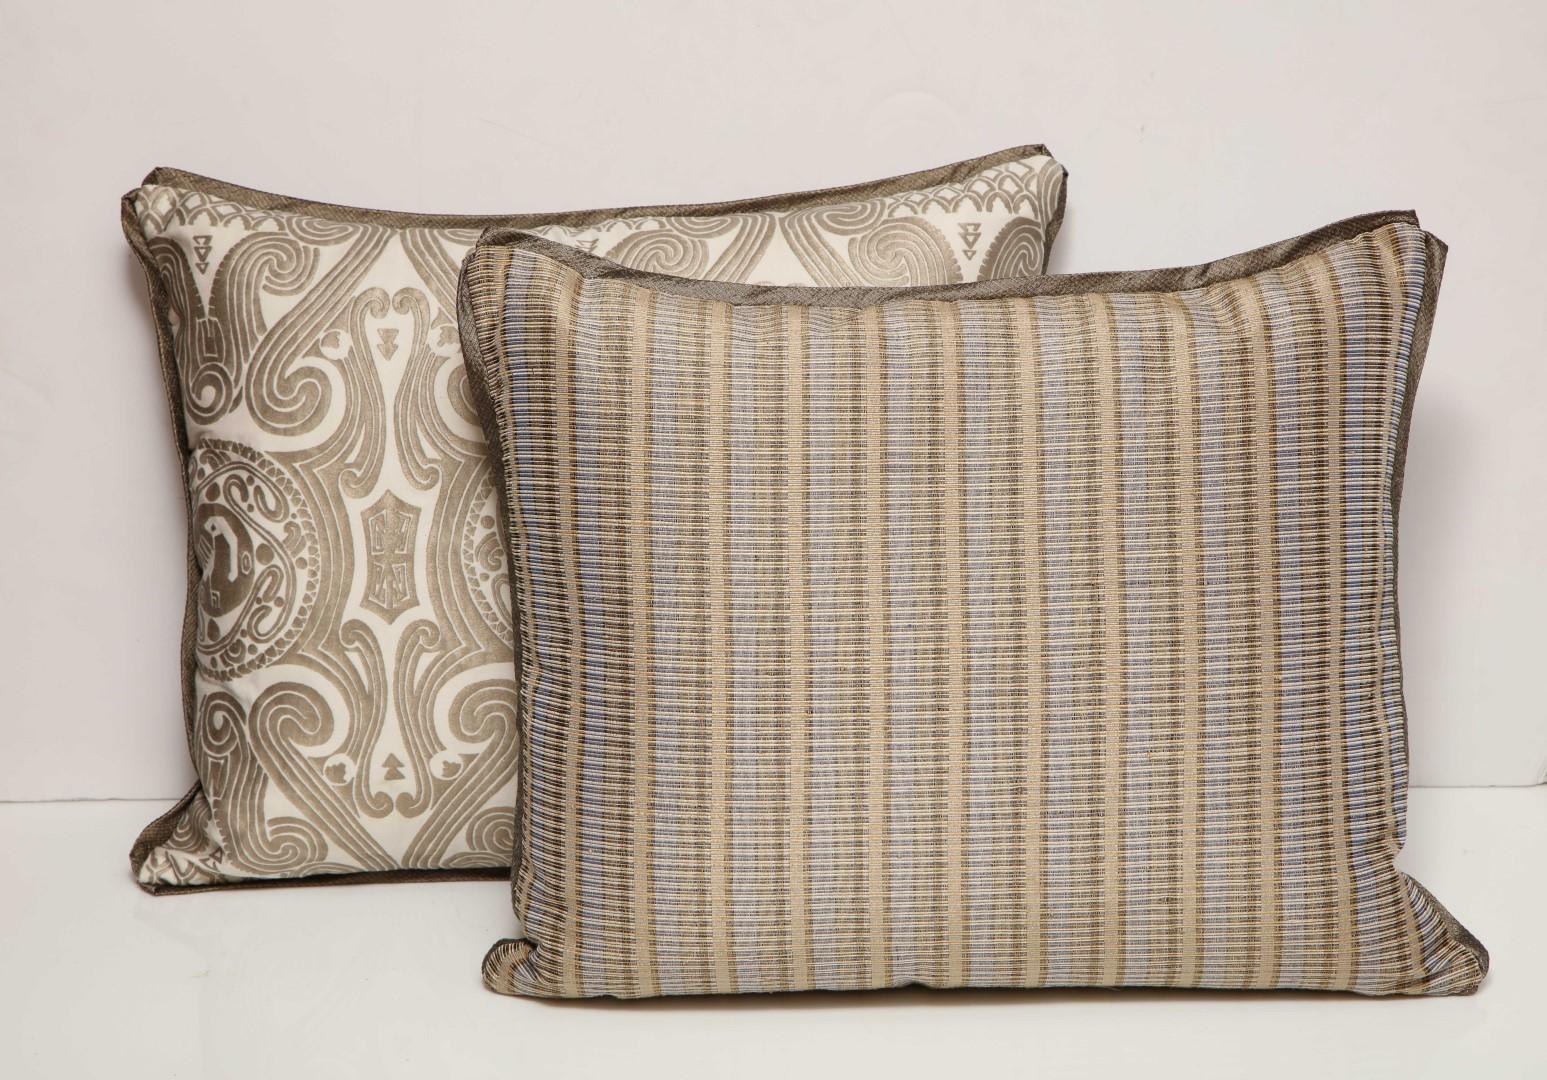 A pair of Fortuny fabric cushions in the Peruviano Inca pattern, white and silver color way
50 down/50 feather insert
Newly made using Fortuny fabric.